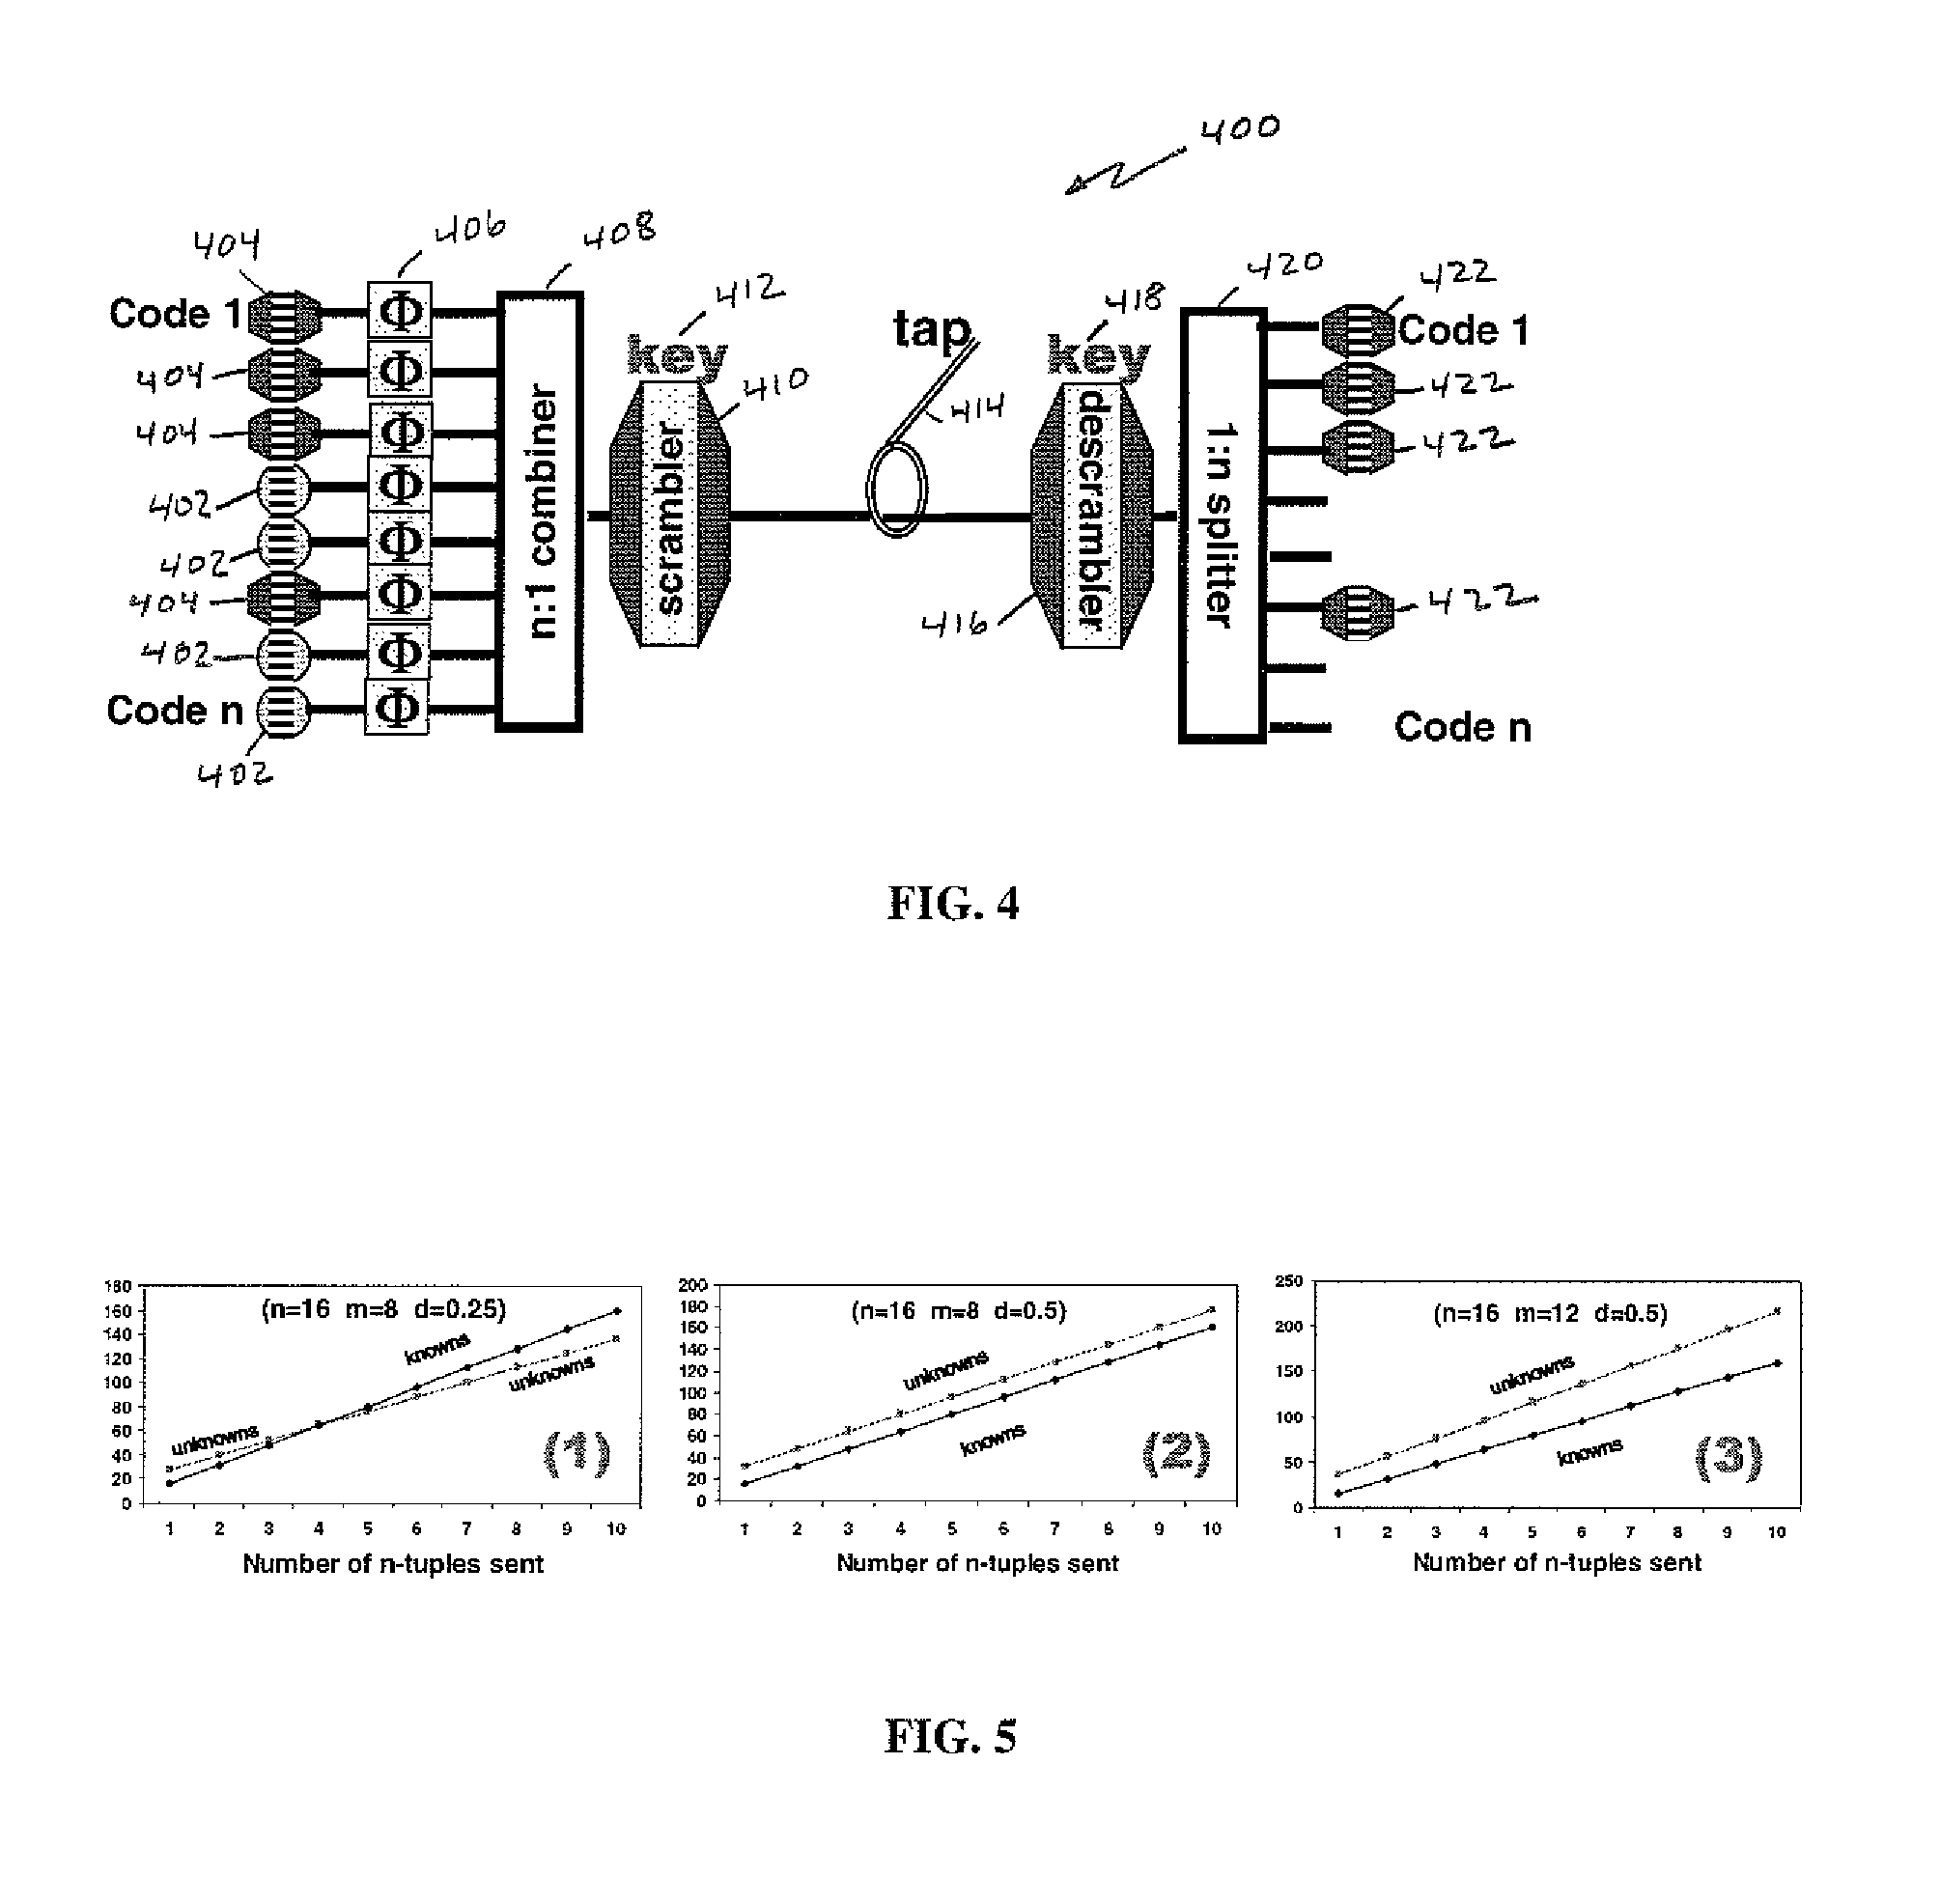 OCDM-based photonic encryption system with provable security